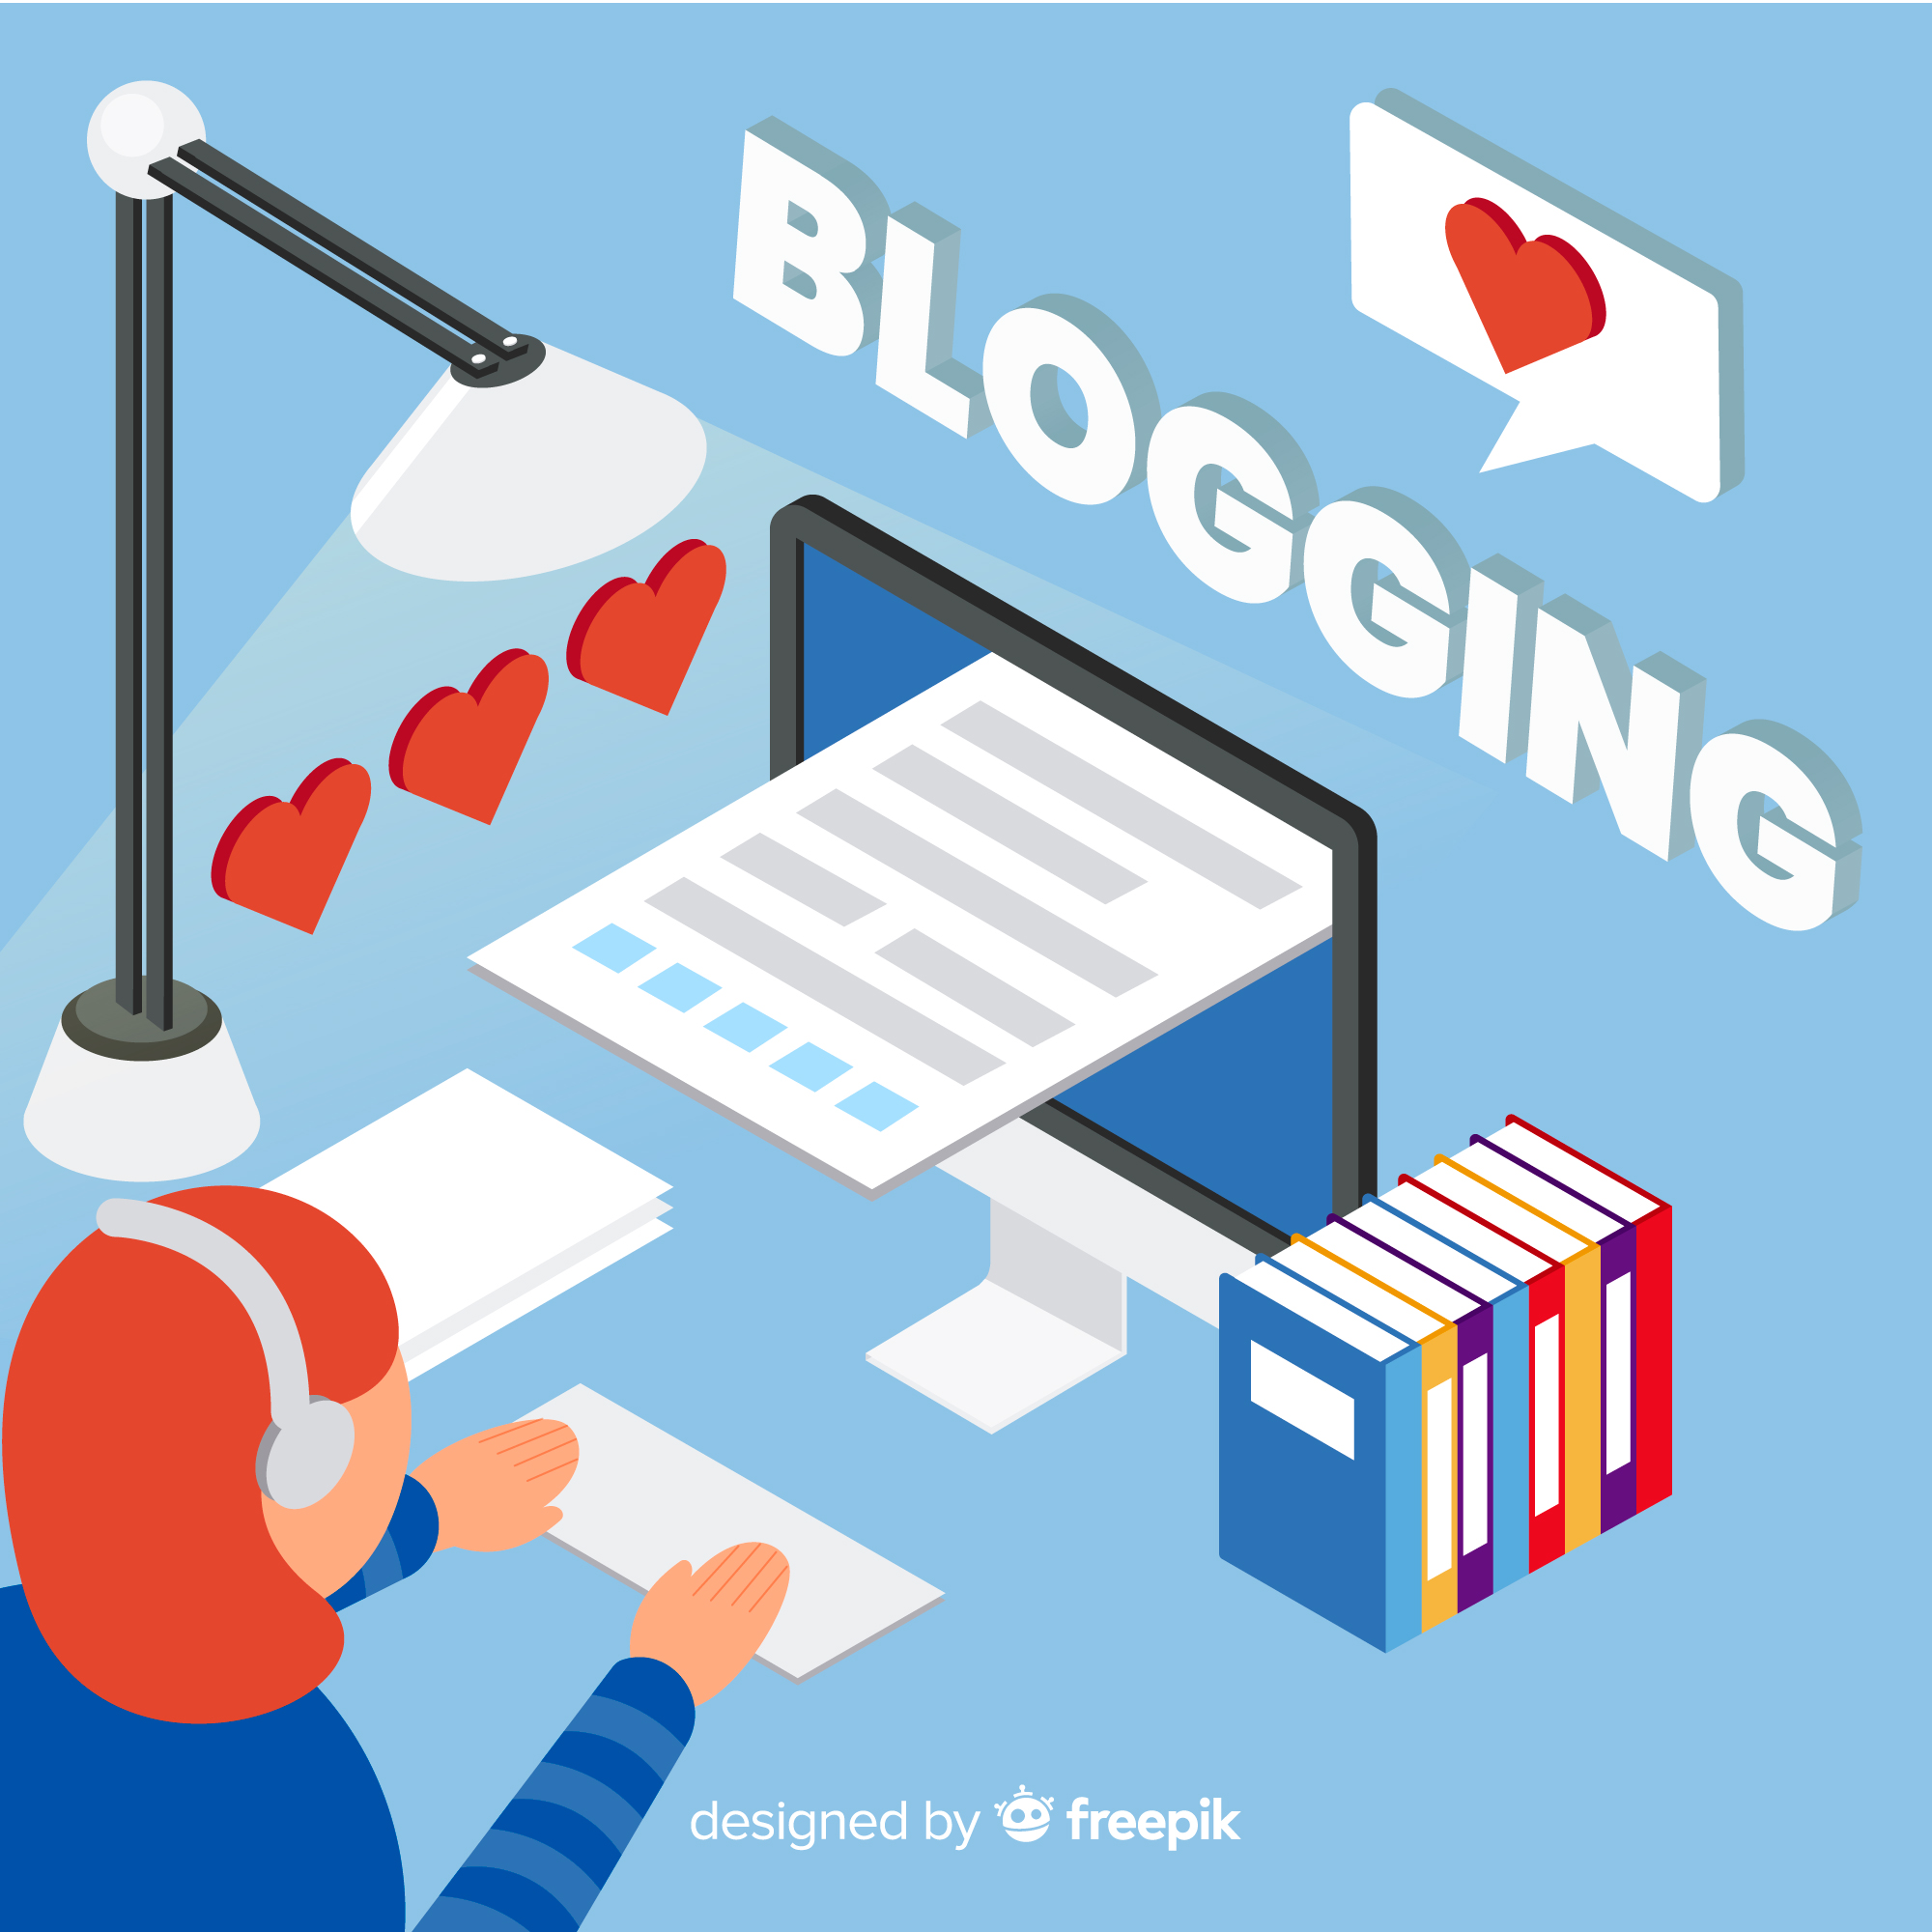 Tips for Starting a Blog & Making Money Out of It